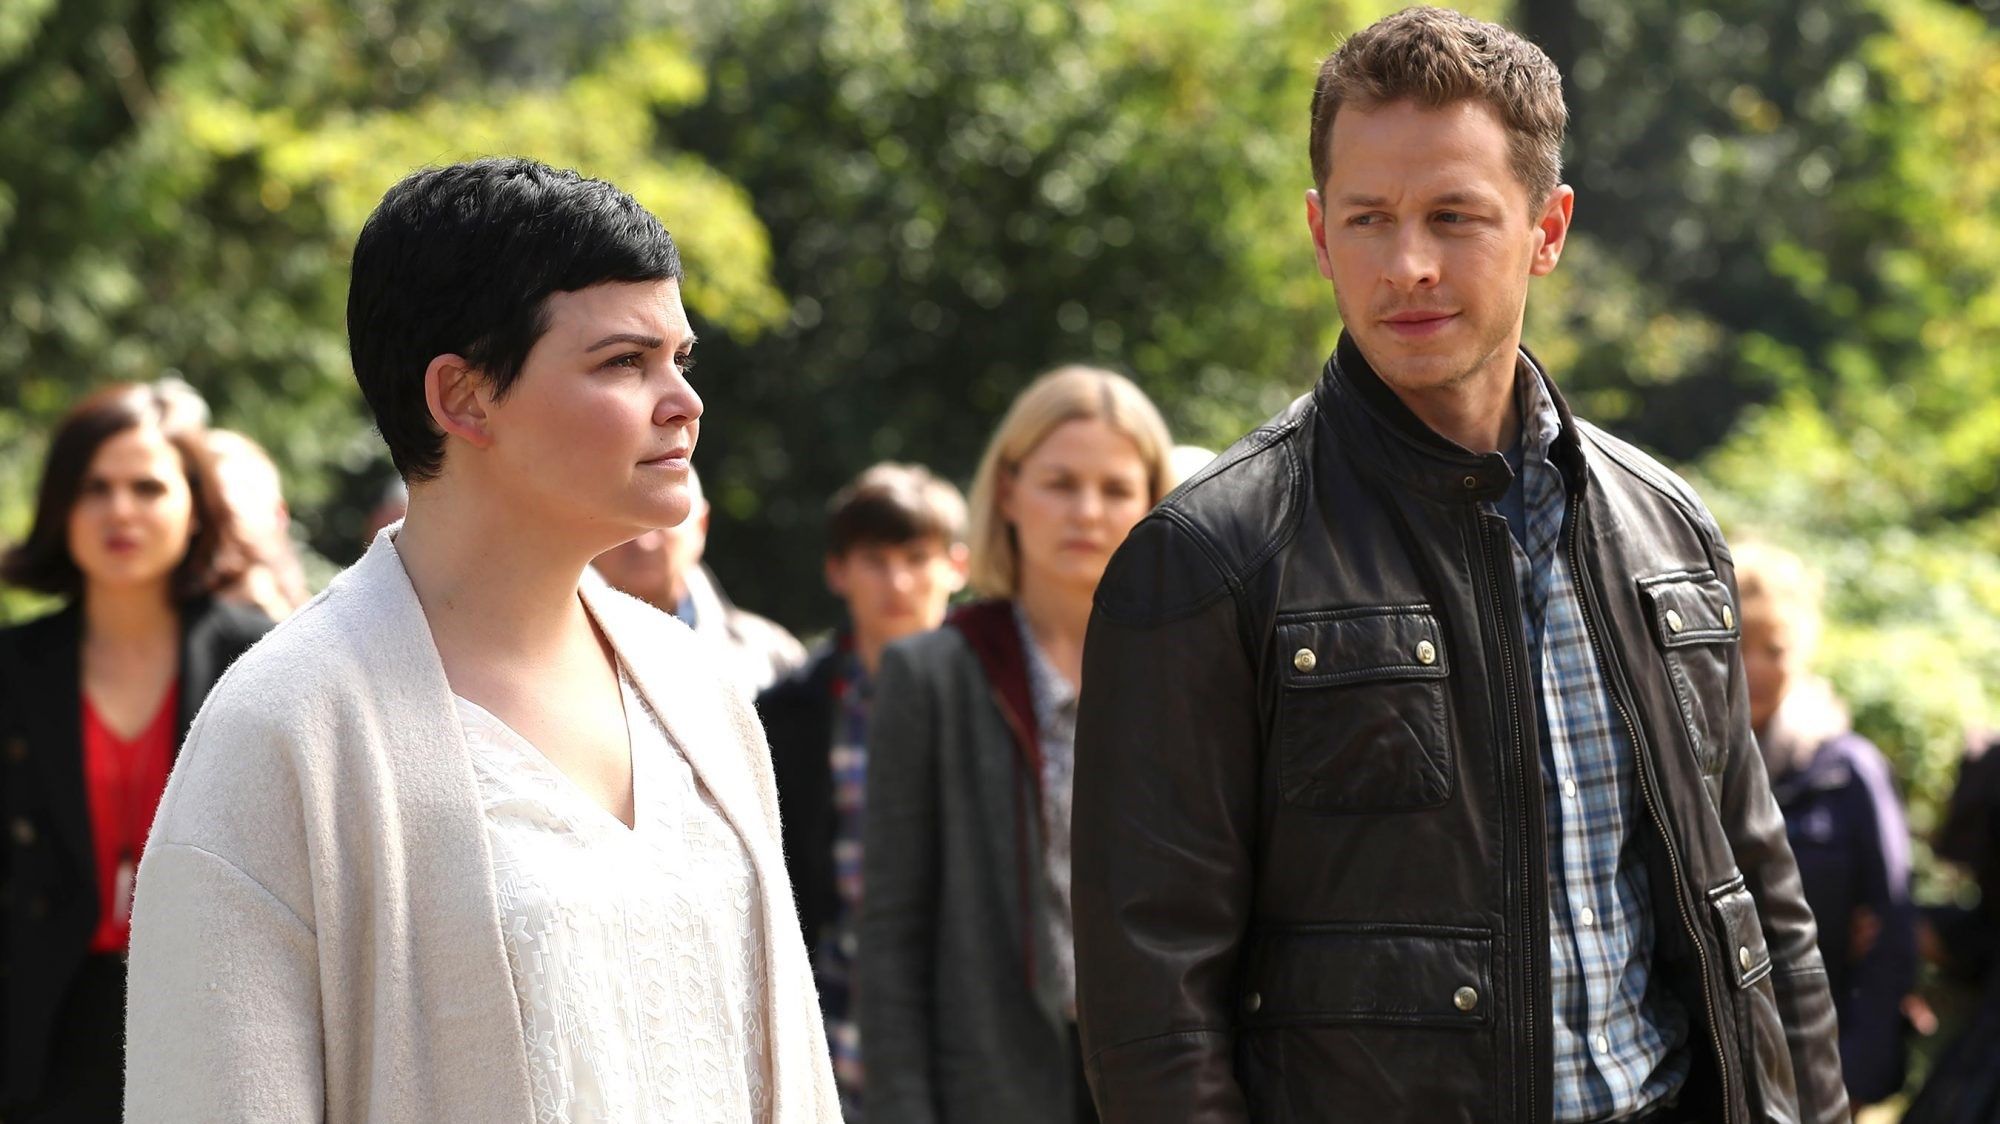 Snow White and Prince Charming- OUAT